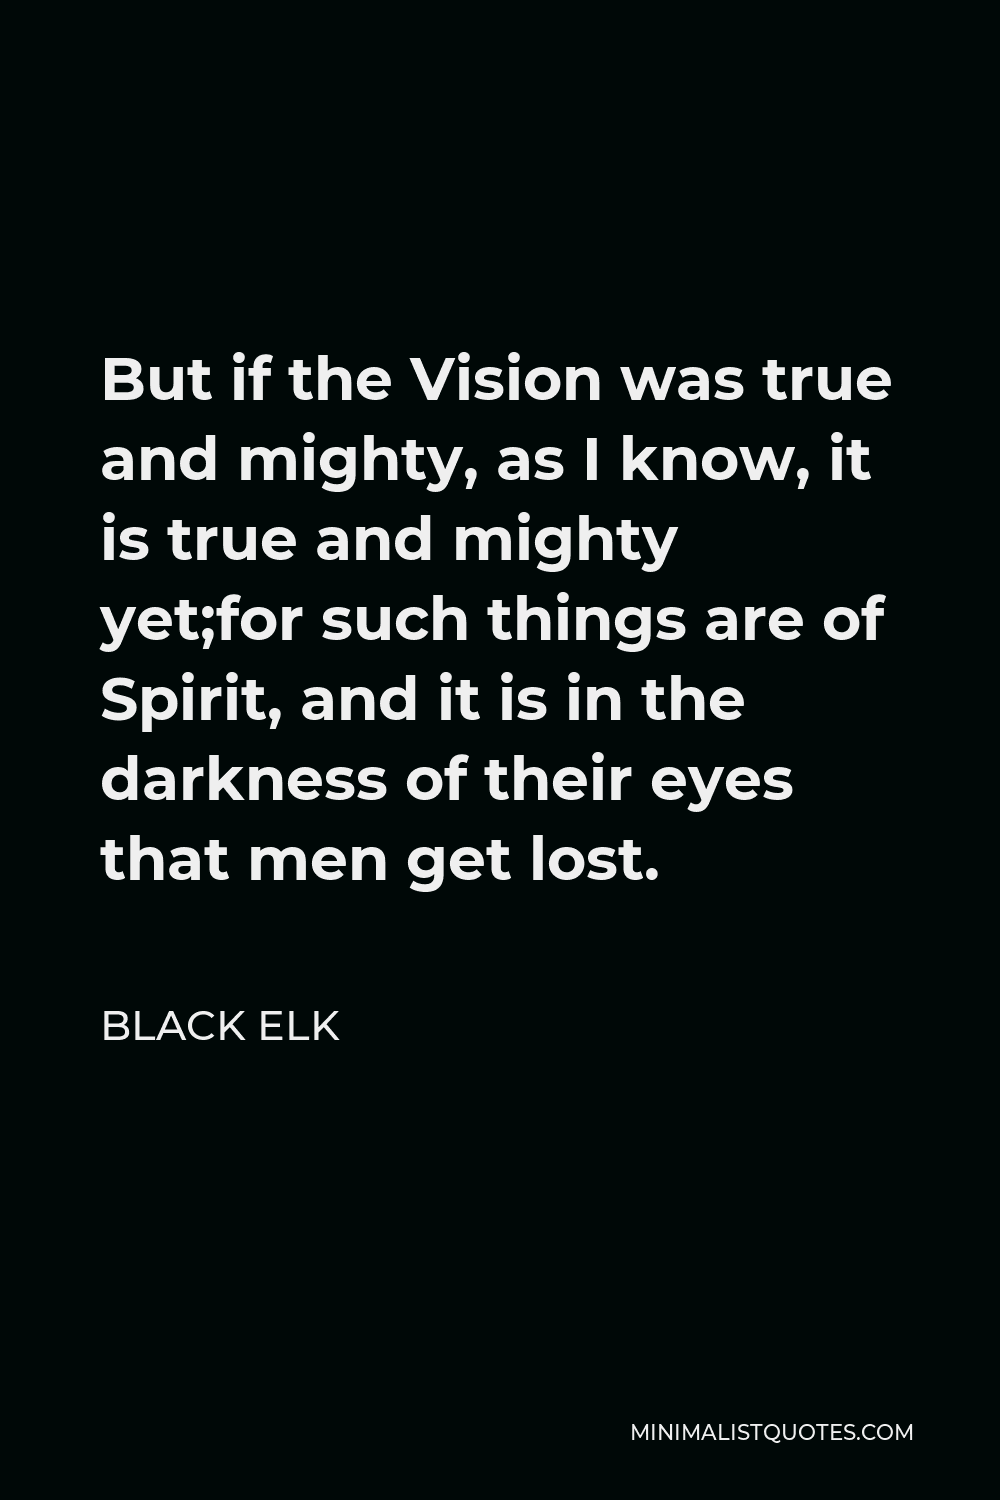 Black Elk Quote - But if the Vision was true and mighty, as I know, it is true and mighty yet;for such things are of Spirit, and it is in the darkness of their eyes that men get lost.